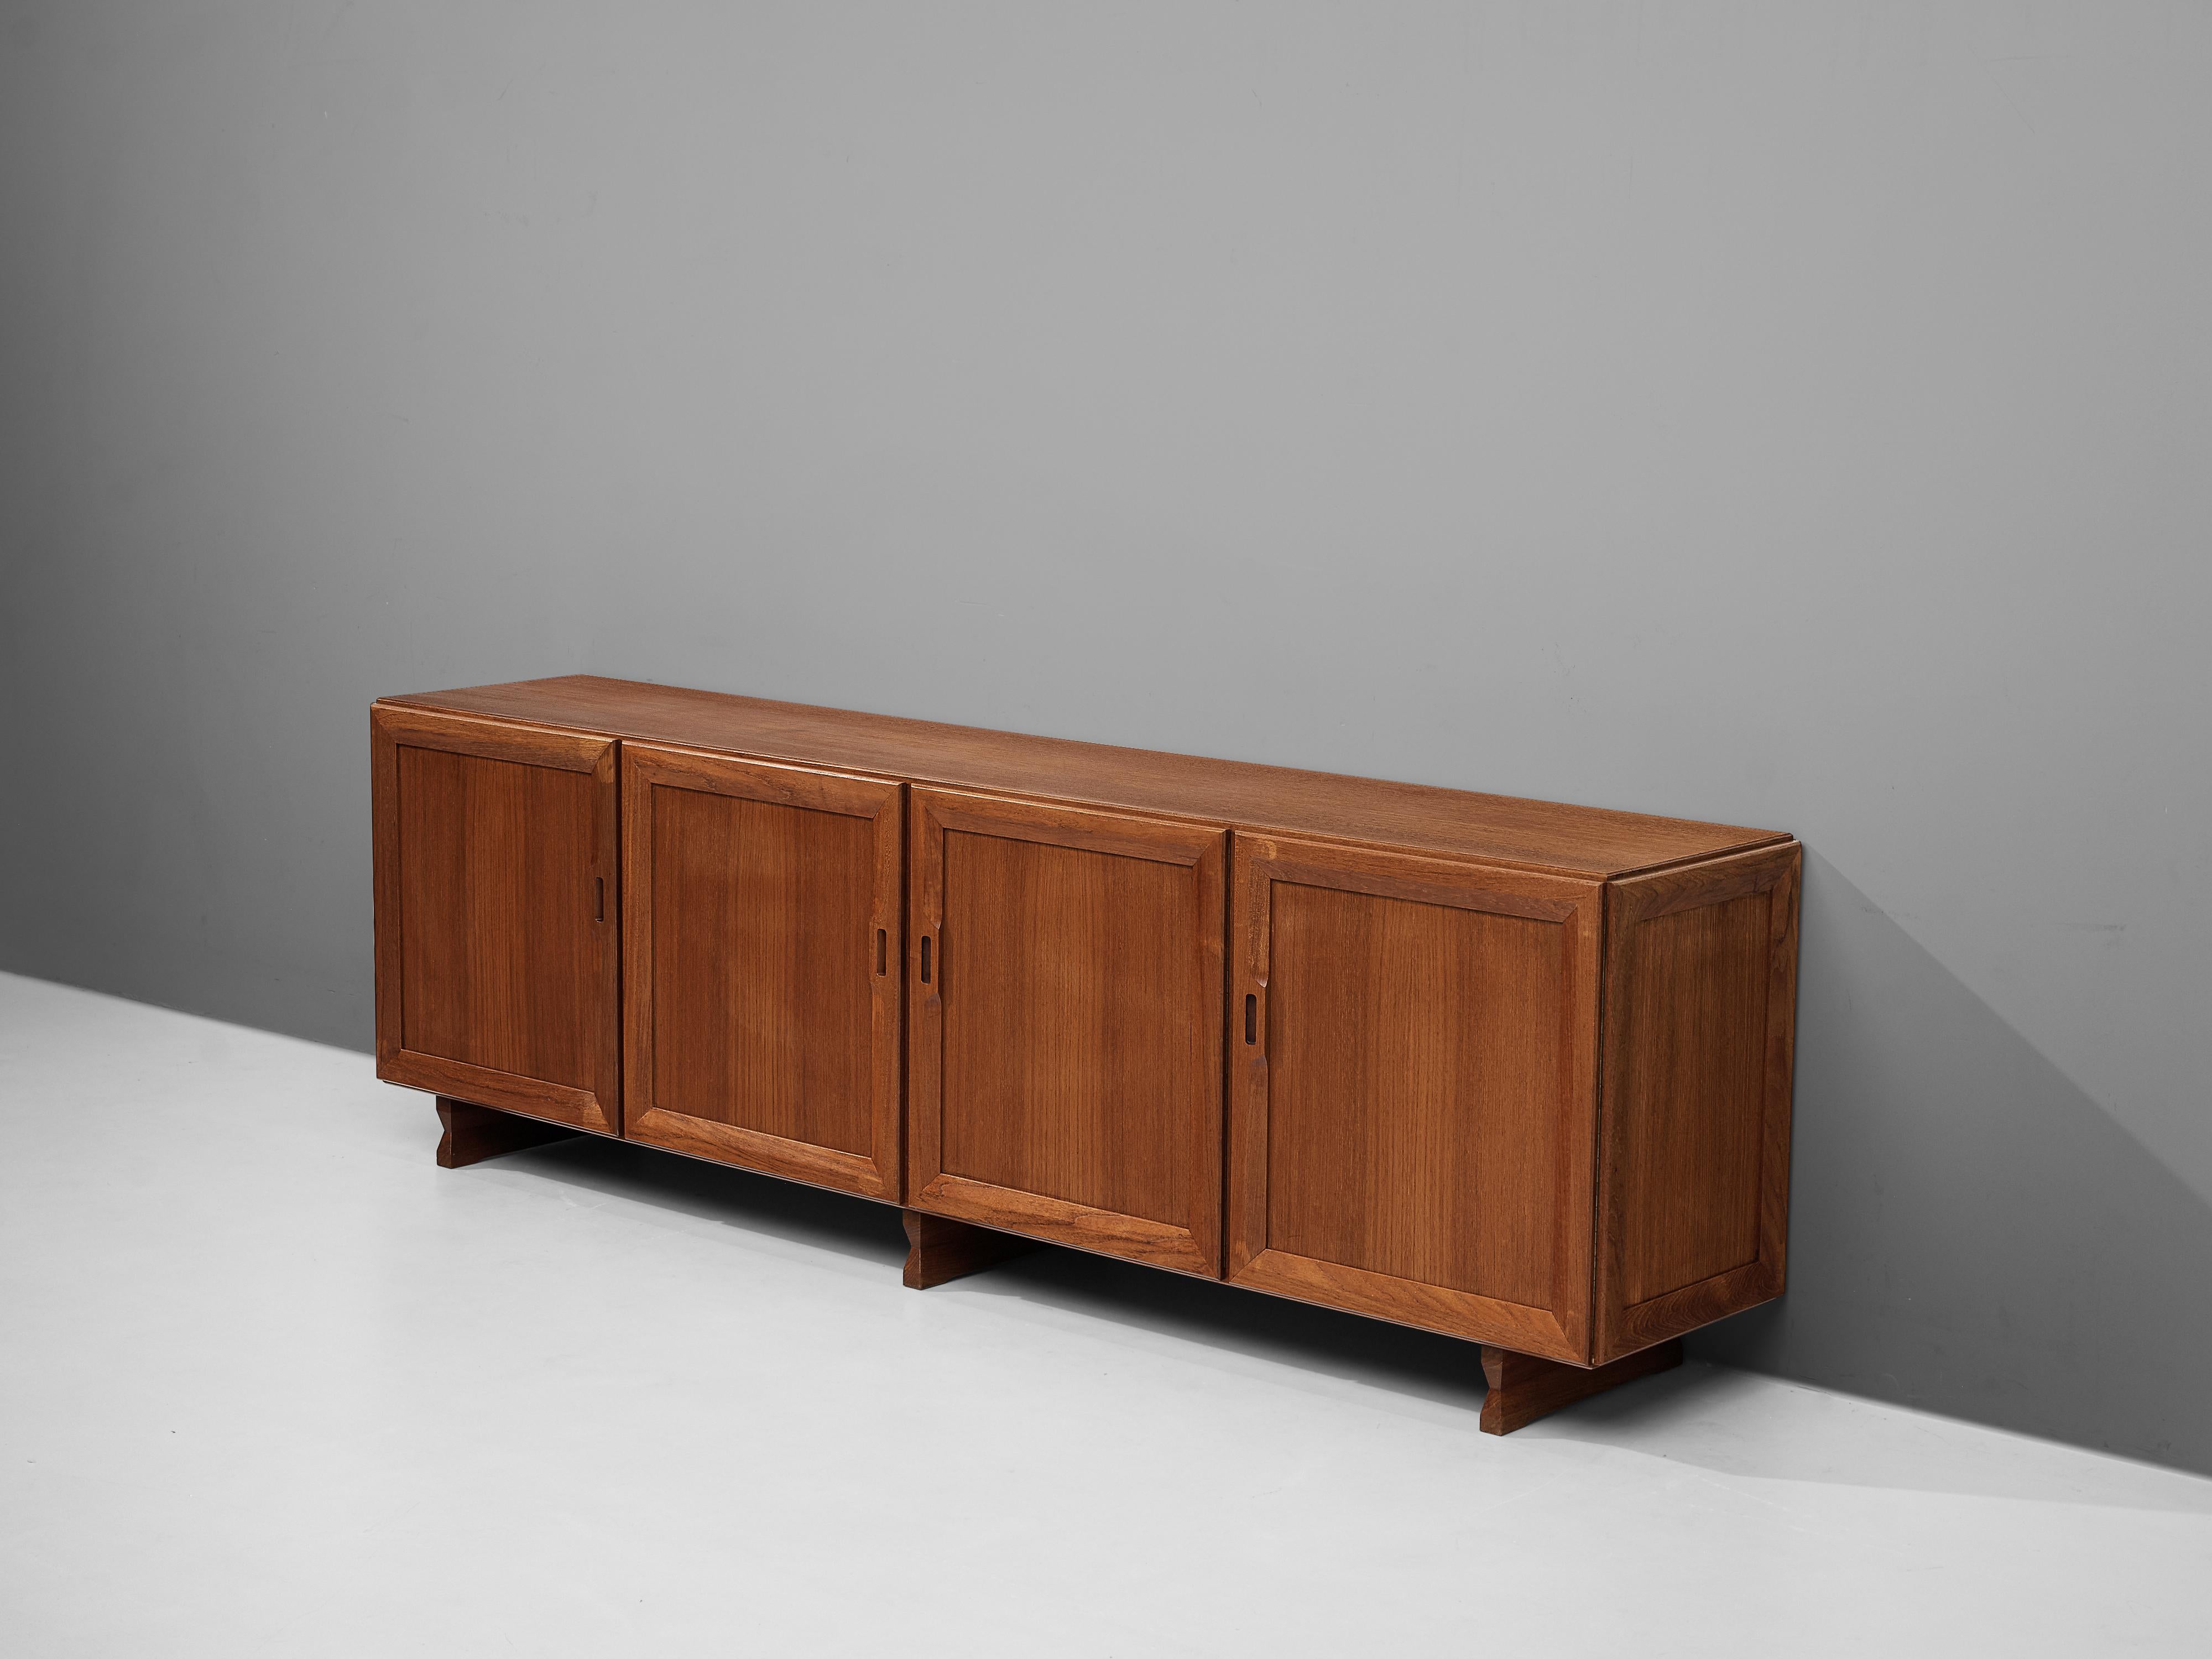 Franco Albini for Poggi, sideboard MB 51, teak, Italy, 1950

Well-designed long sideboard by Franco Albini for Poggi, which features a simplistic design with sharp lines. This modern sideboard has four compartments which you can access through